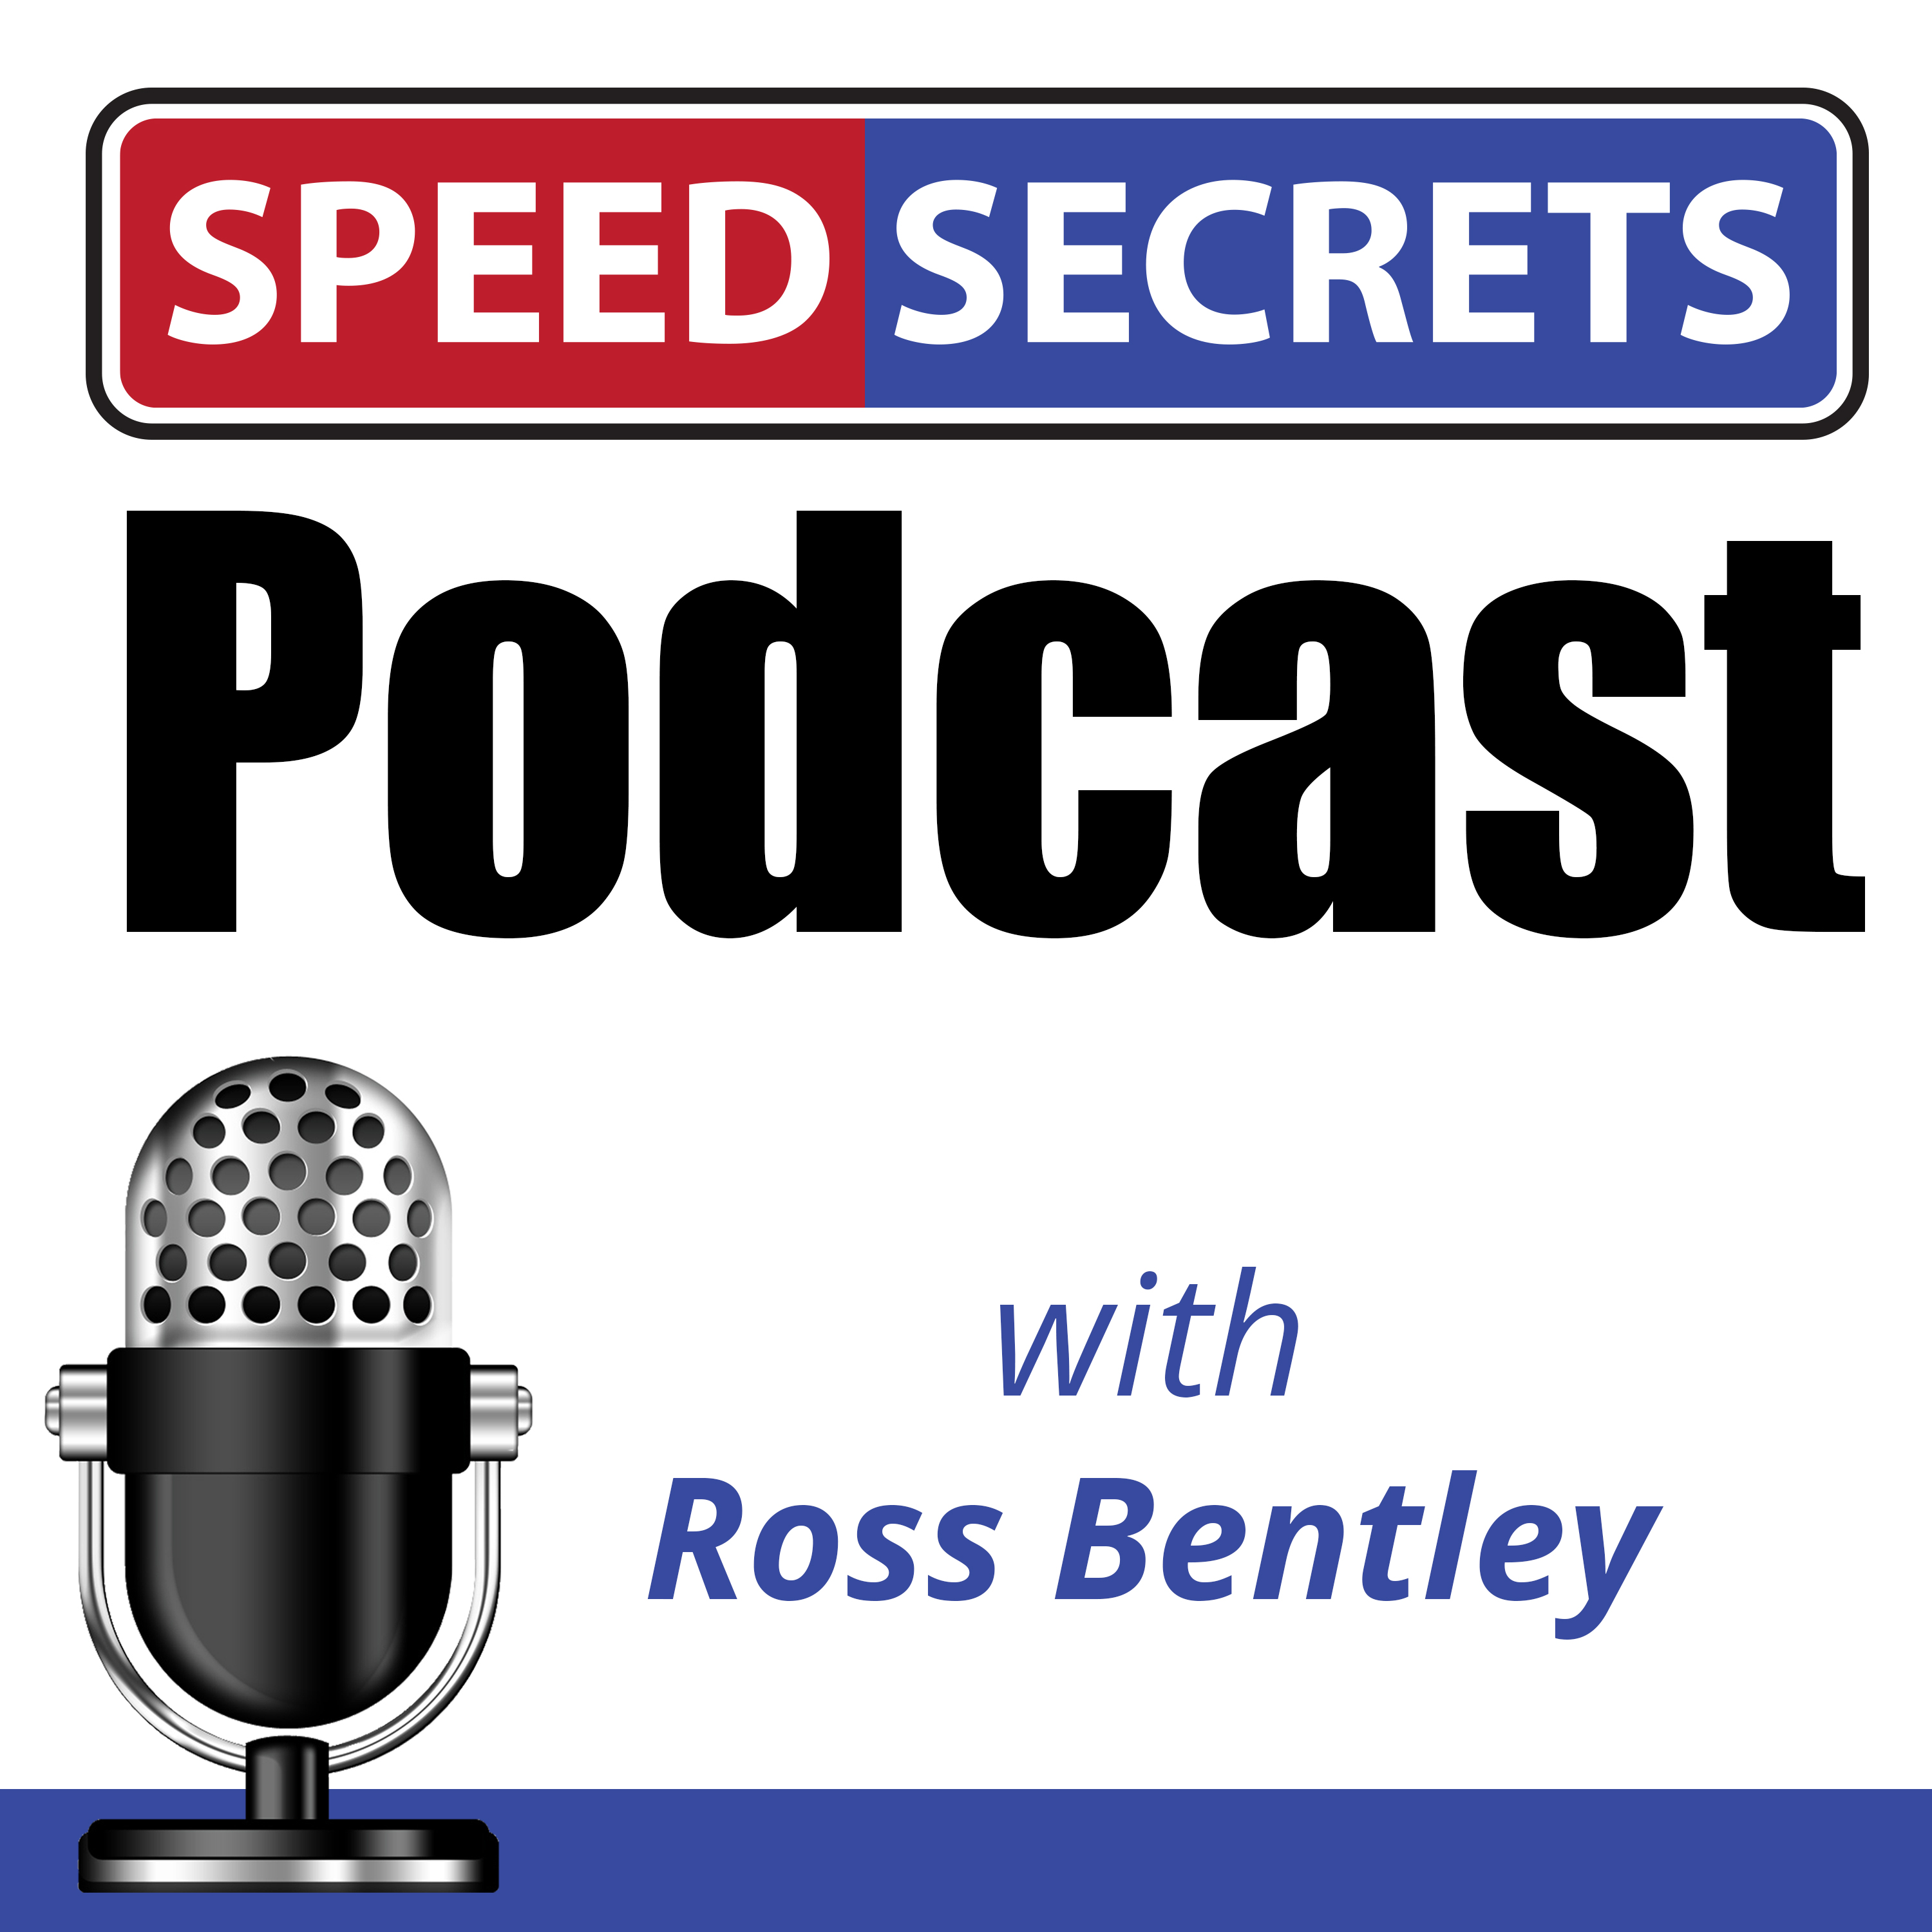 The Speed Secrets Podcast | High Performance & Race Driving with Ross Bentley | Tips & conversations to help you drive better